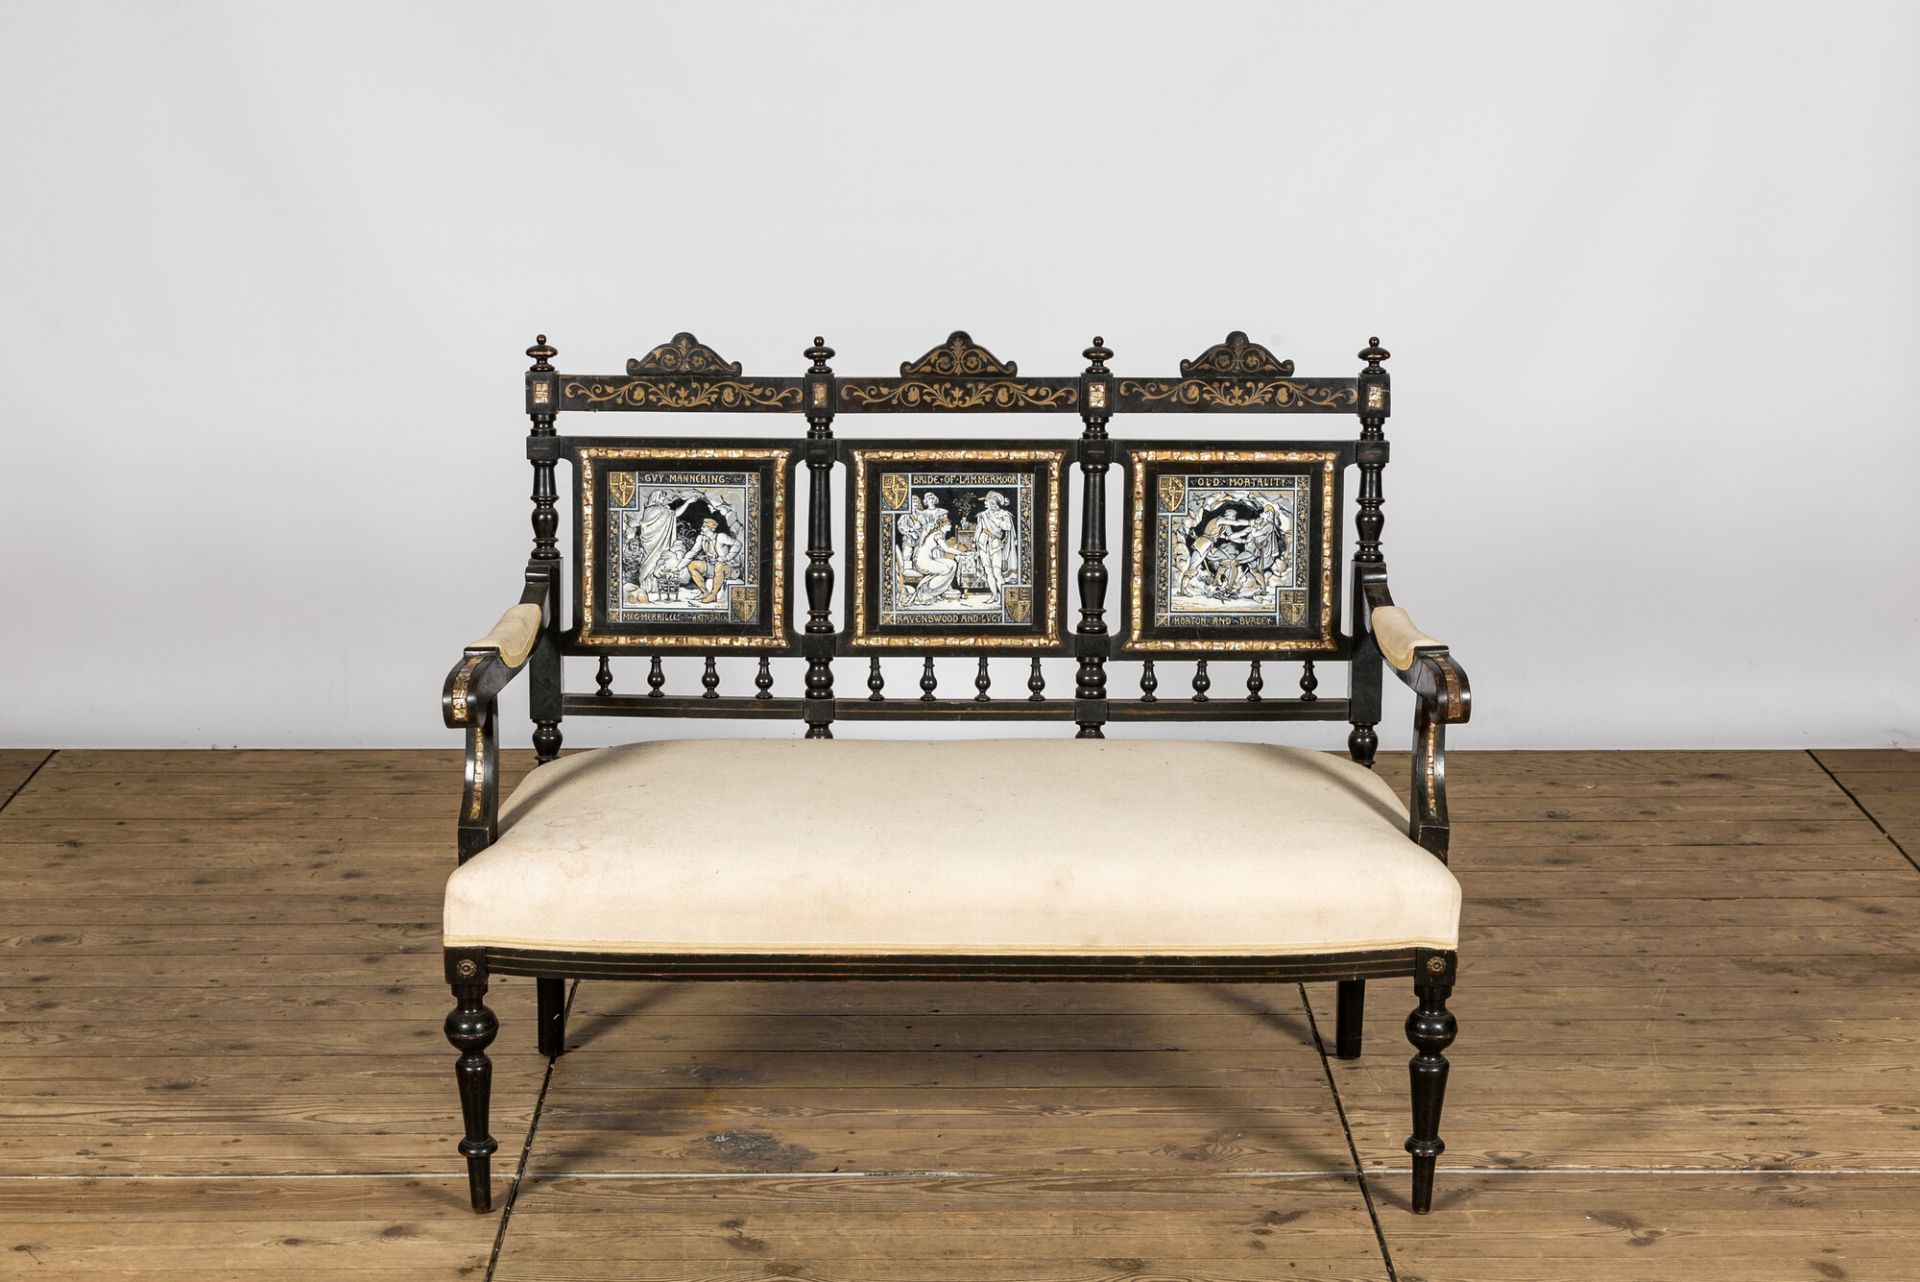 An English ebonised wooden sofa with mother-of-pearl inlaid and three Minton Waverley plaques by Joh